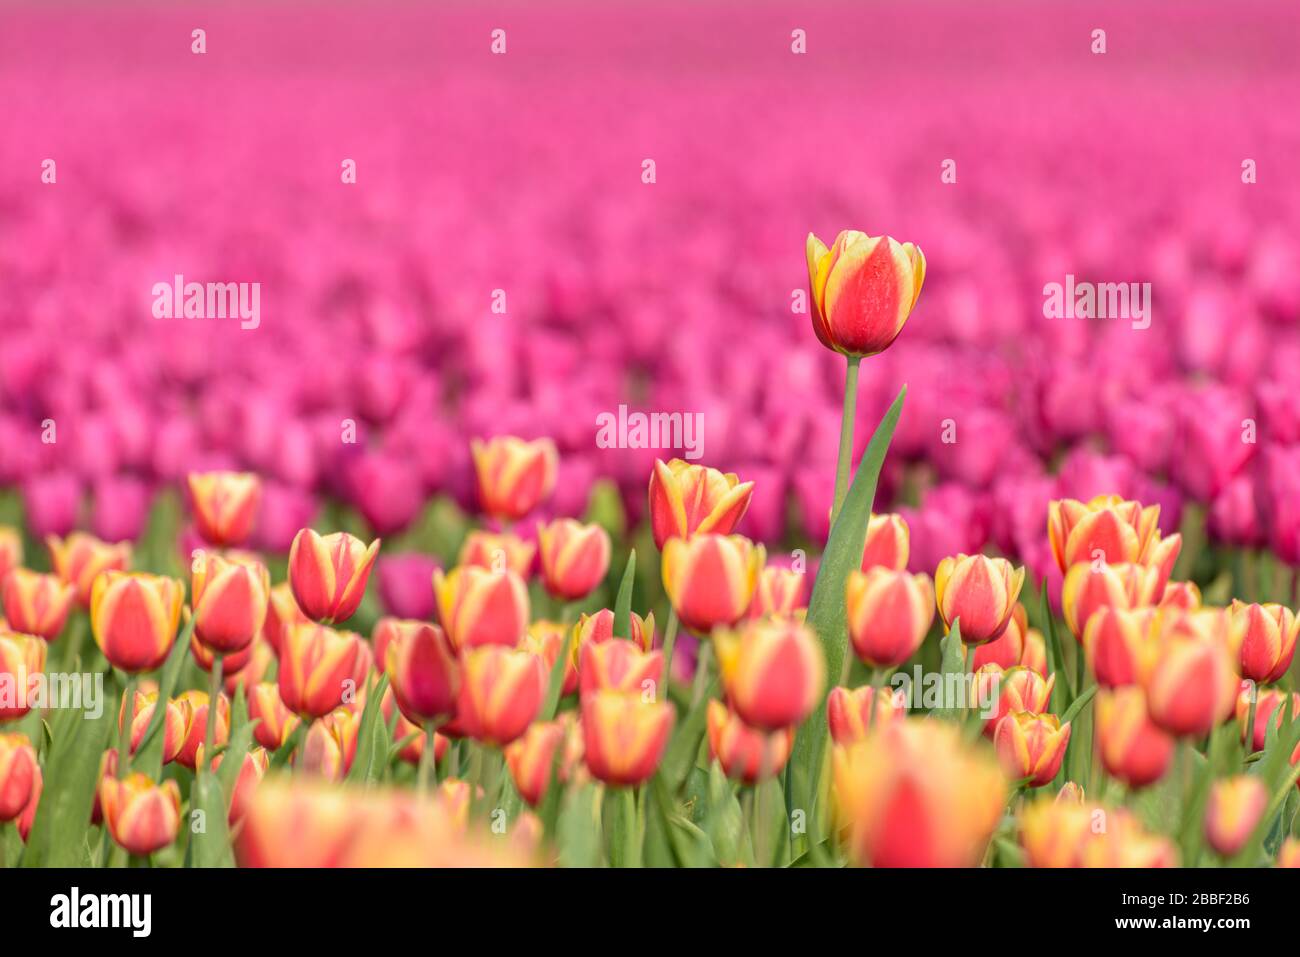 A tulip field in Holland with a yellow red tulip growing high above the other tulips. The single tulip stands out from the others against a field of p Stock Photo